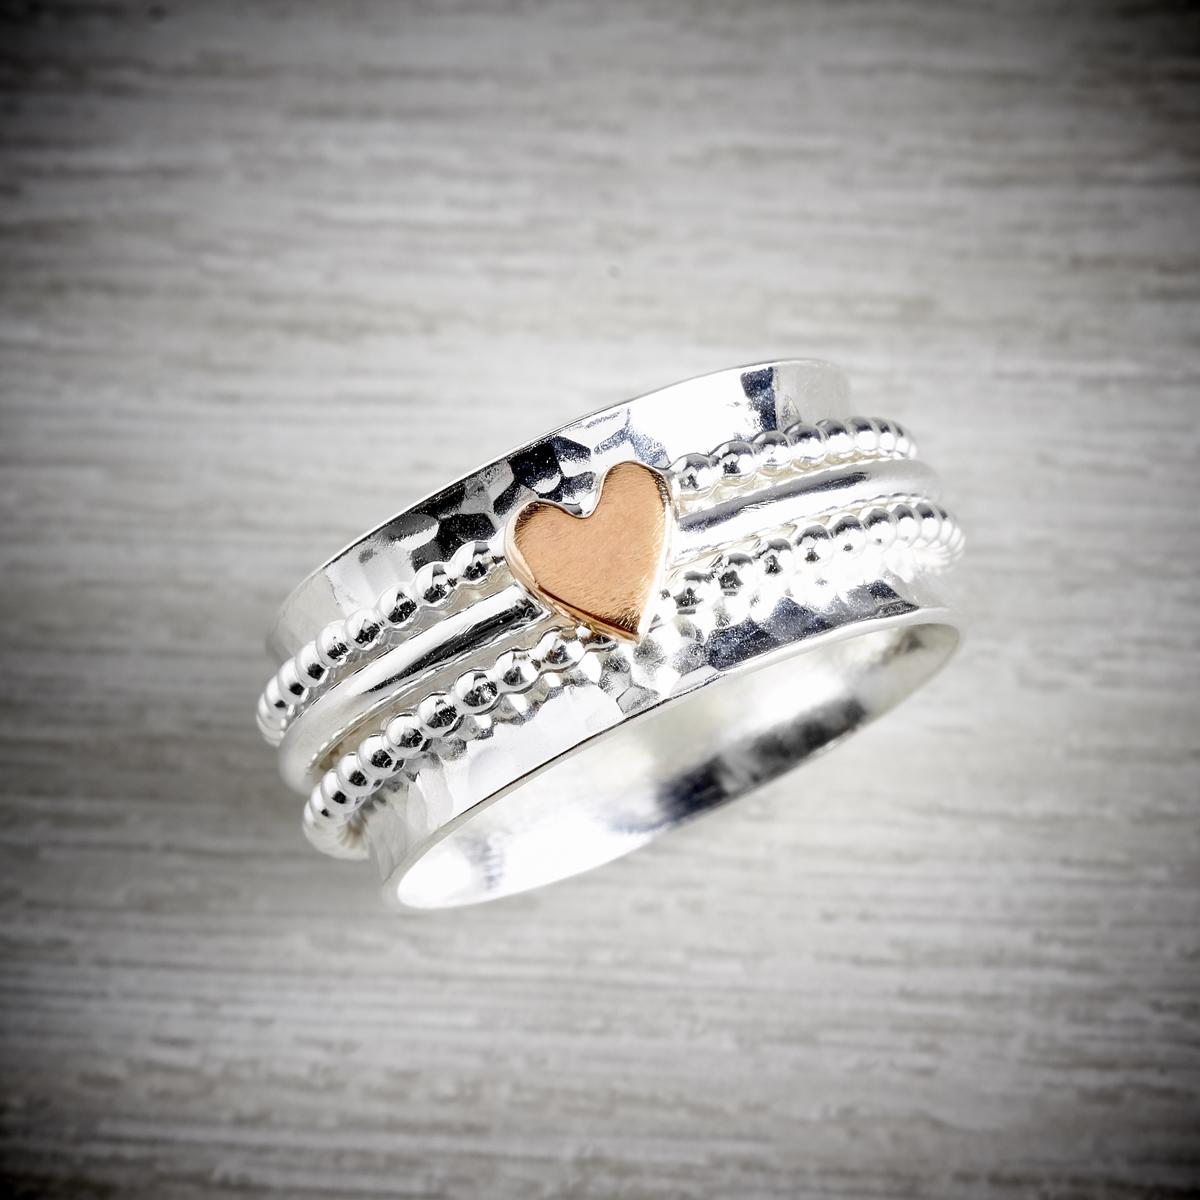 silver spinning ring with teeny tiny rose gold heart by elin mair available from the jewellery makers. IMAGE PROPERTY OF EMMA WHITE-0